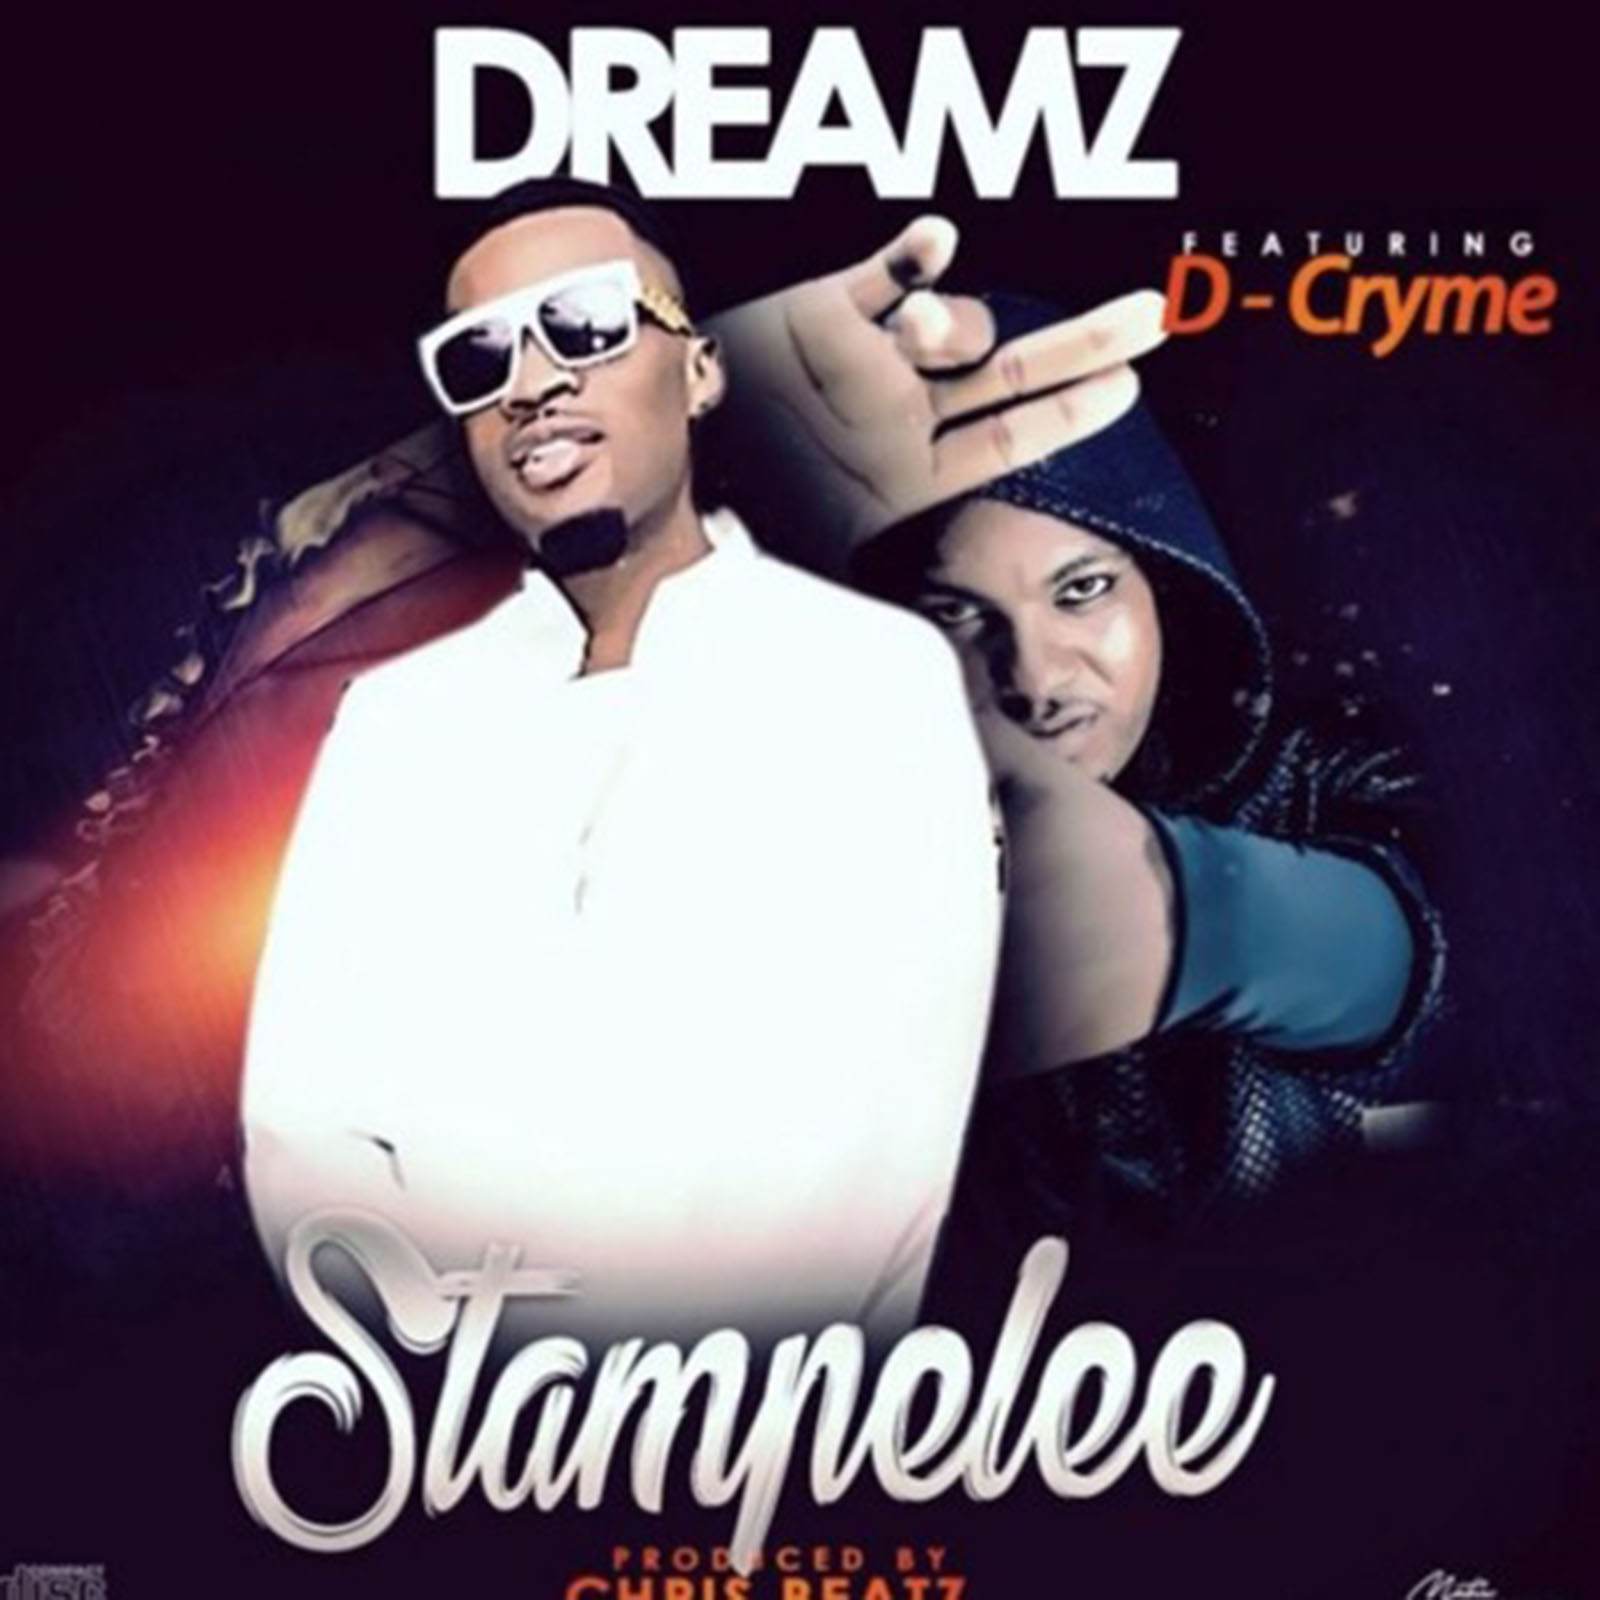 Stampelee by Dreamz feat. Dr. Cryme